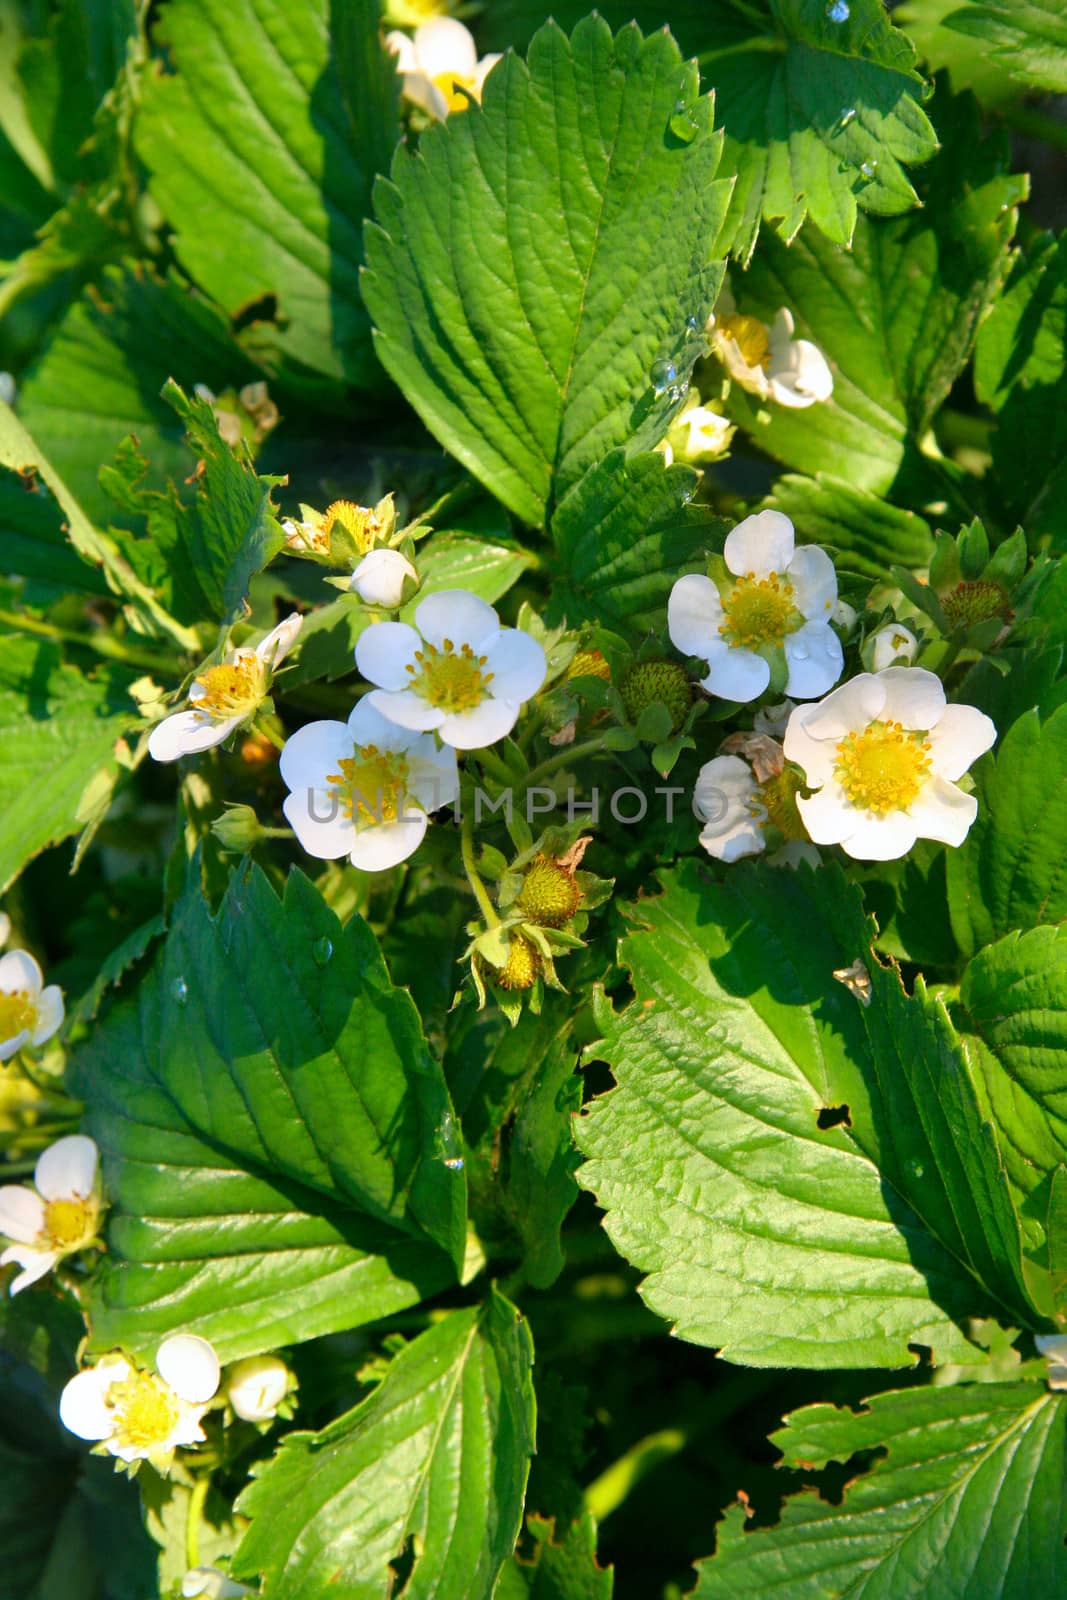 strawberry flowerswith leaves  in garden in summer day